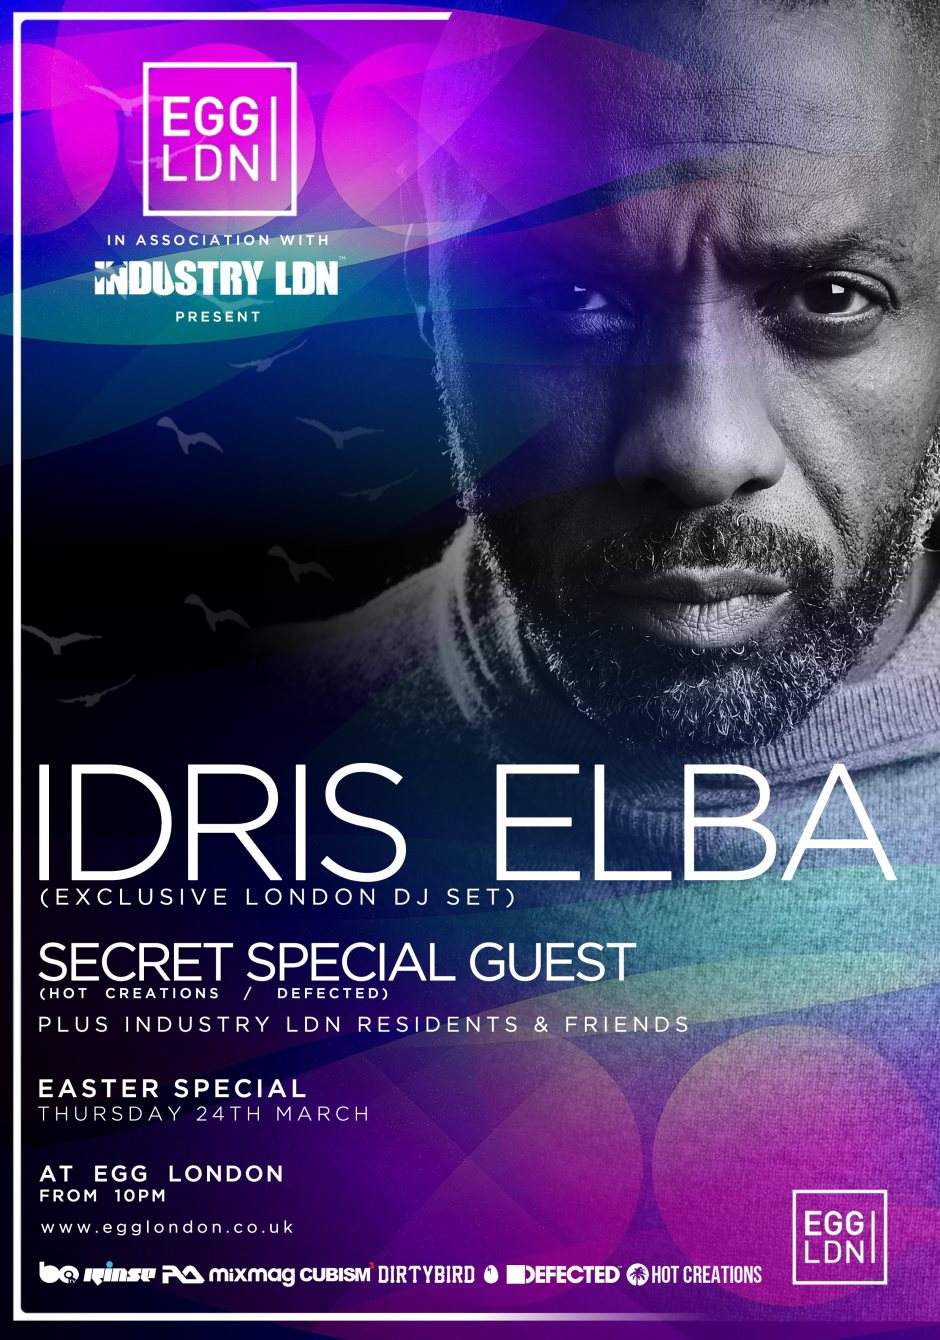 Egg LDN in Assoc. with Industry LDN: Idris Elba, Saytek, Barber and Secret Special Guest - フライヤー表